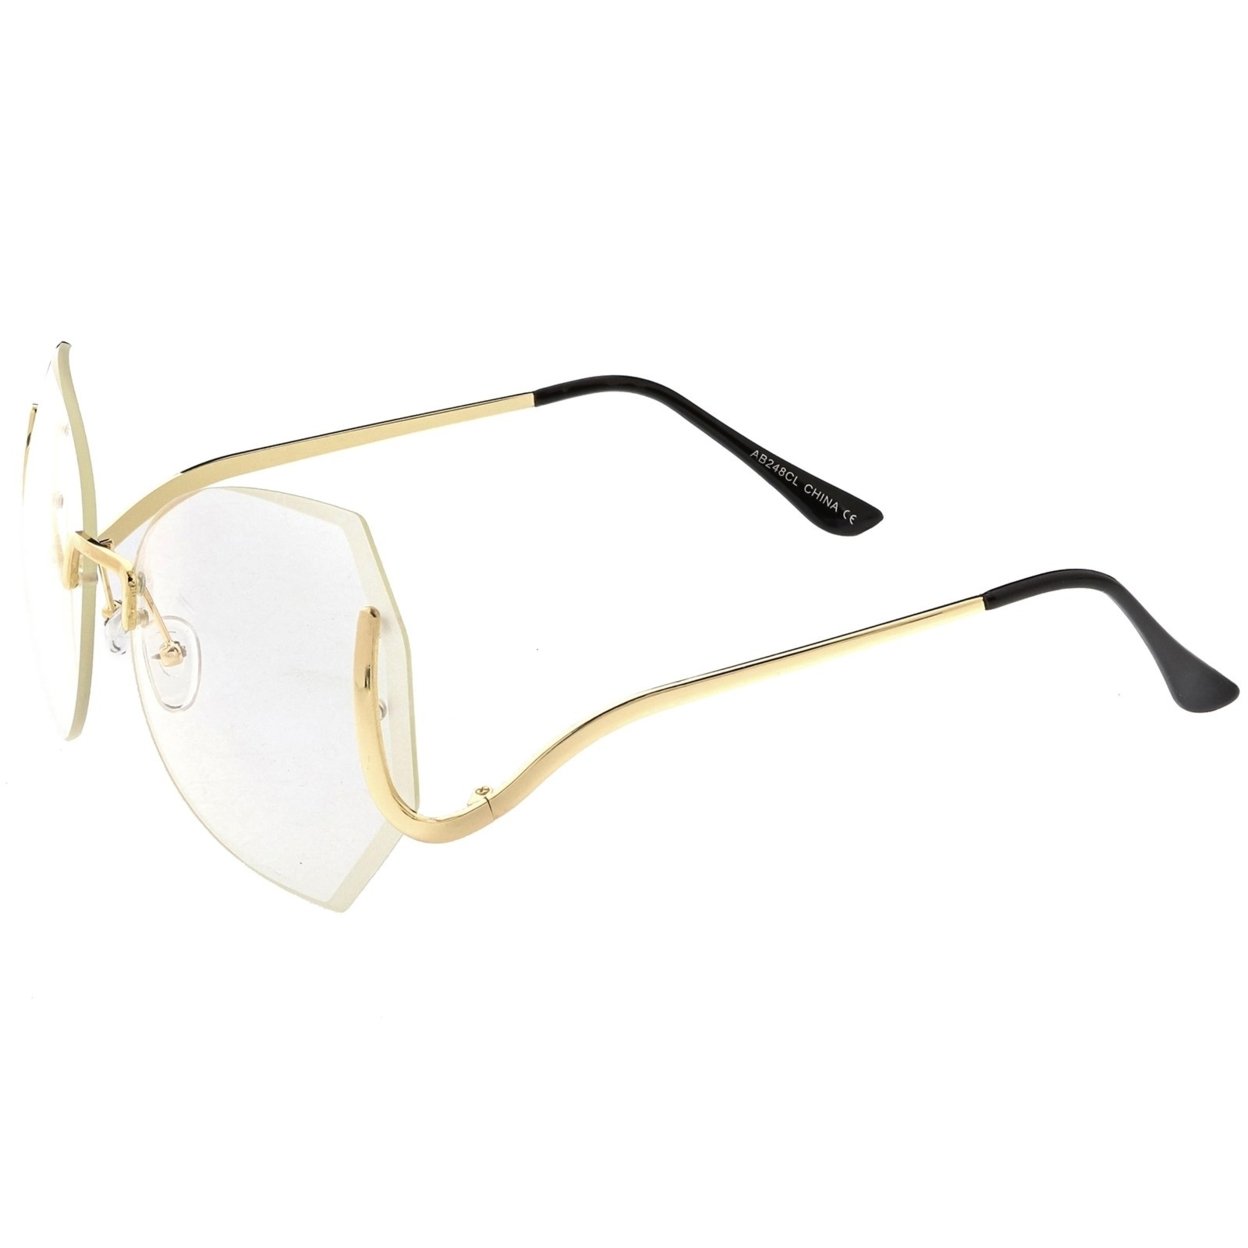 Oversize Beveled Butterfly Rimless Round Glasses Curved Metal Arms Clear Lens 60mm - Gold / Clear